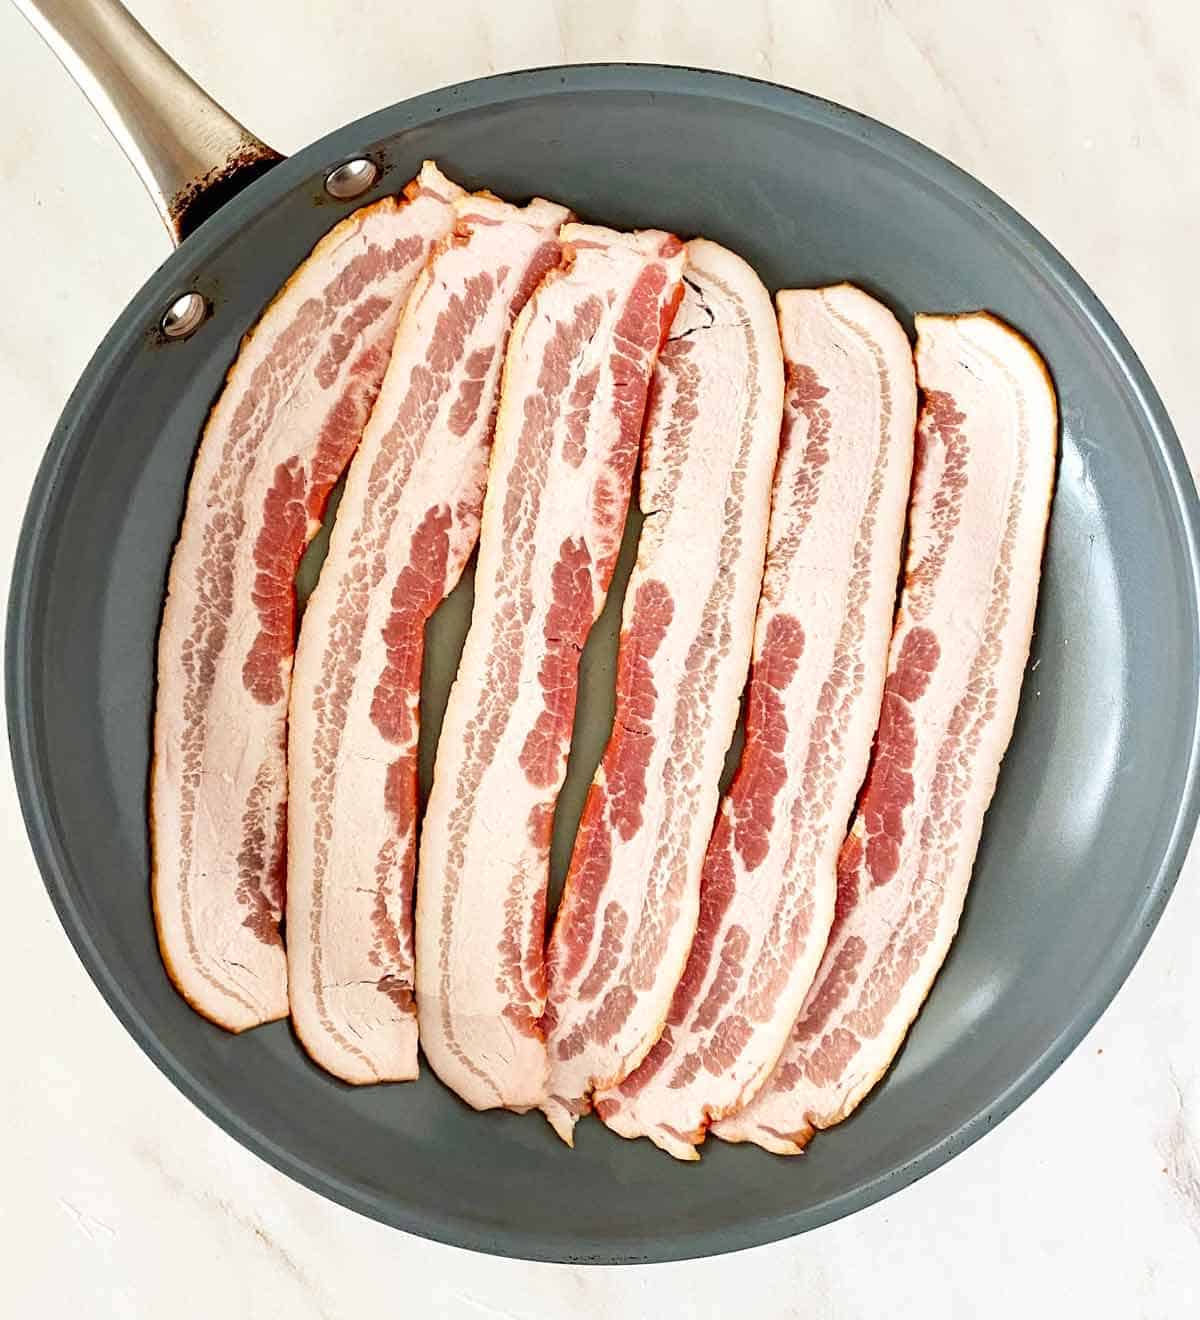 Six raw bacon strips in a nonstick skillet.